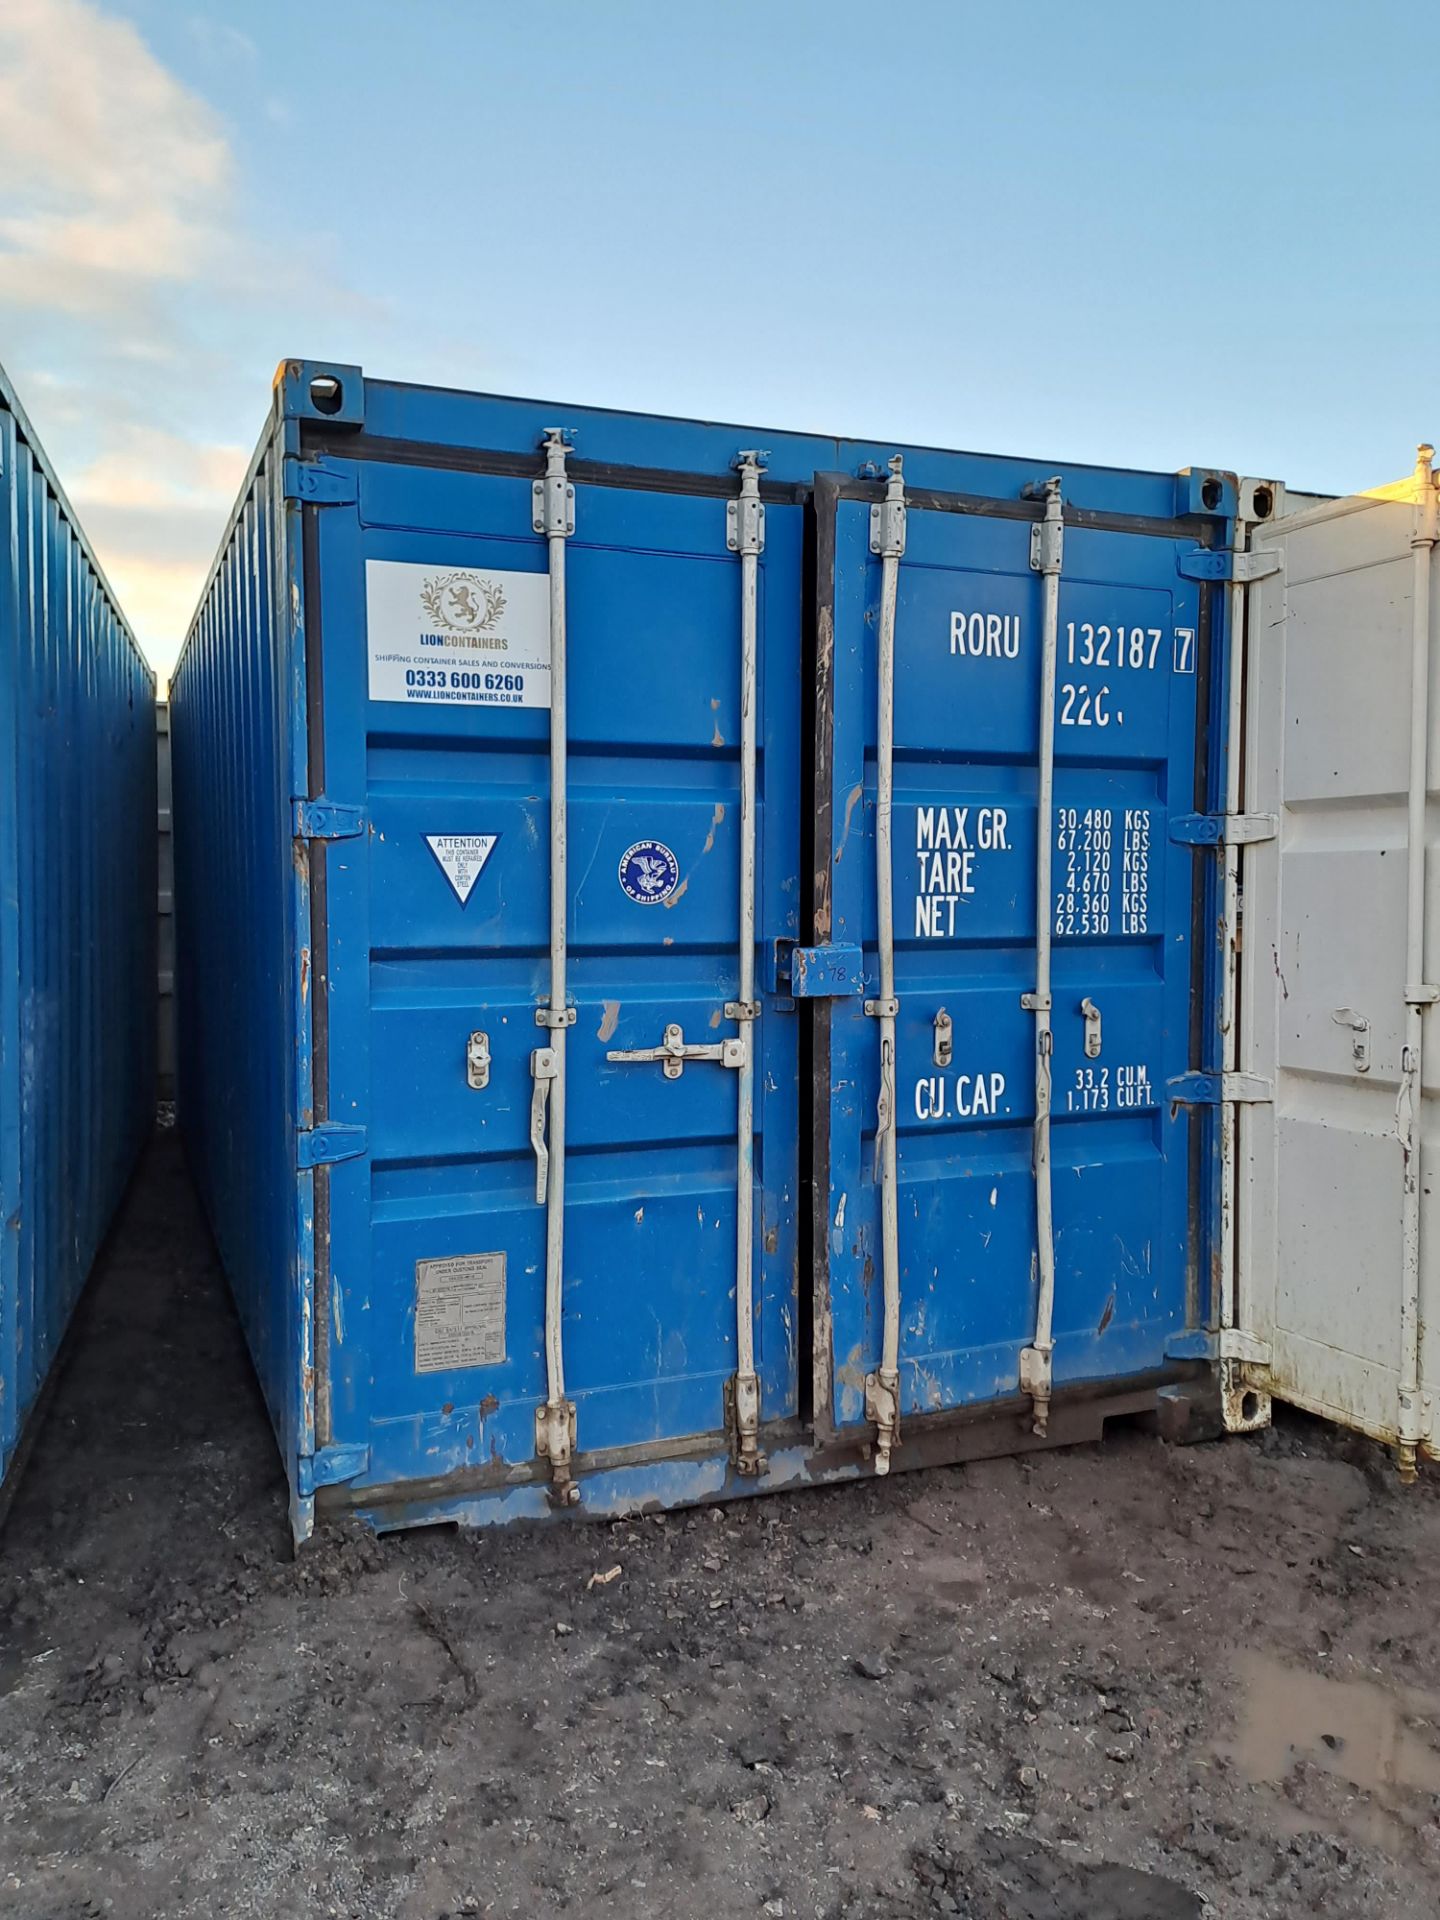 Lions Containers XP-STDT-16 20ft shipping container, serial no. XC 638530, year 2017